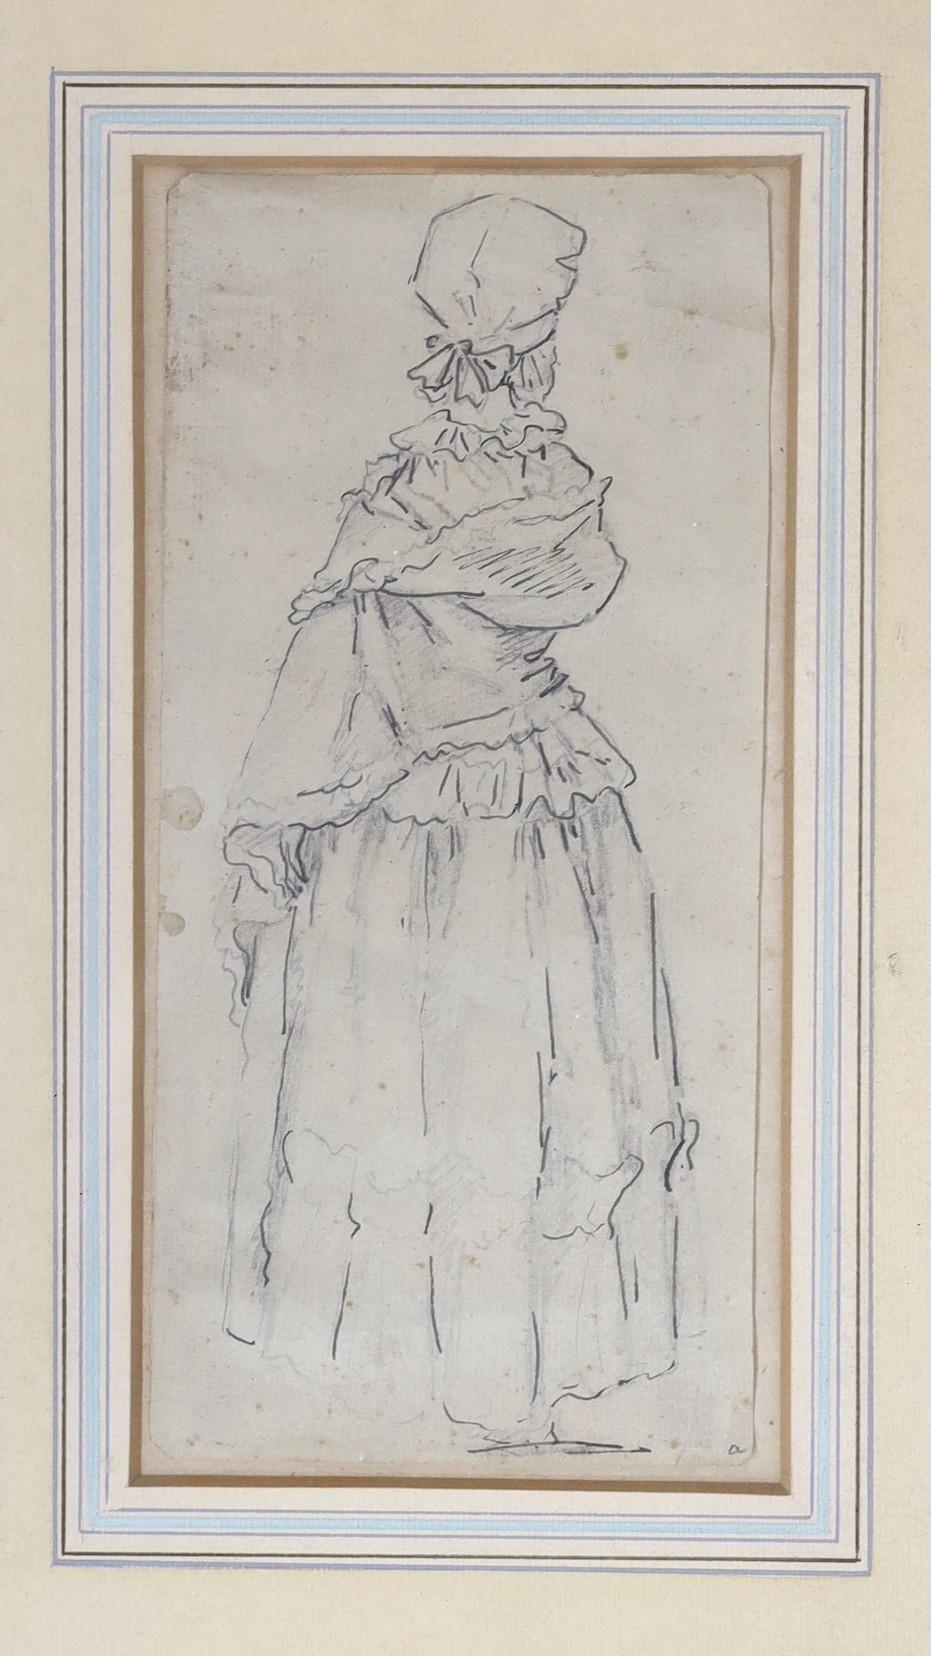 18th century English School, pen and ink, Sketch from Life of a woman's costume, 20 x 9.5cm